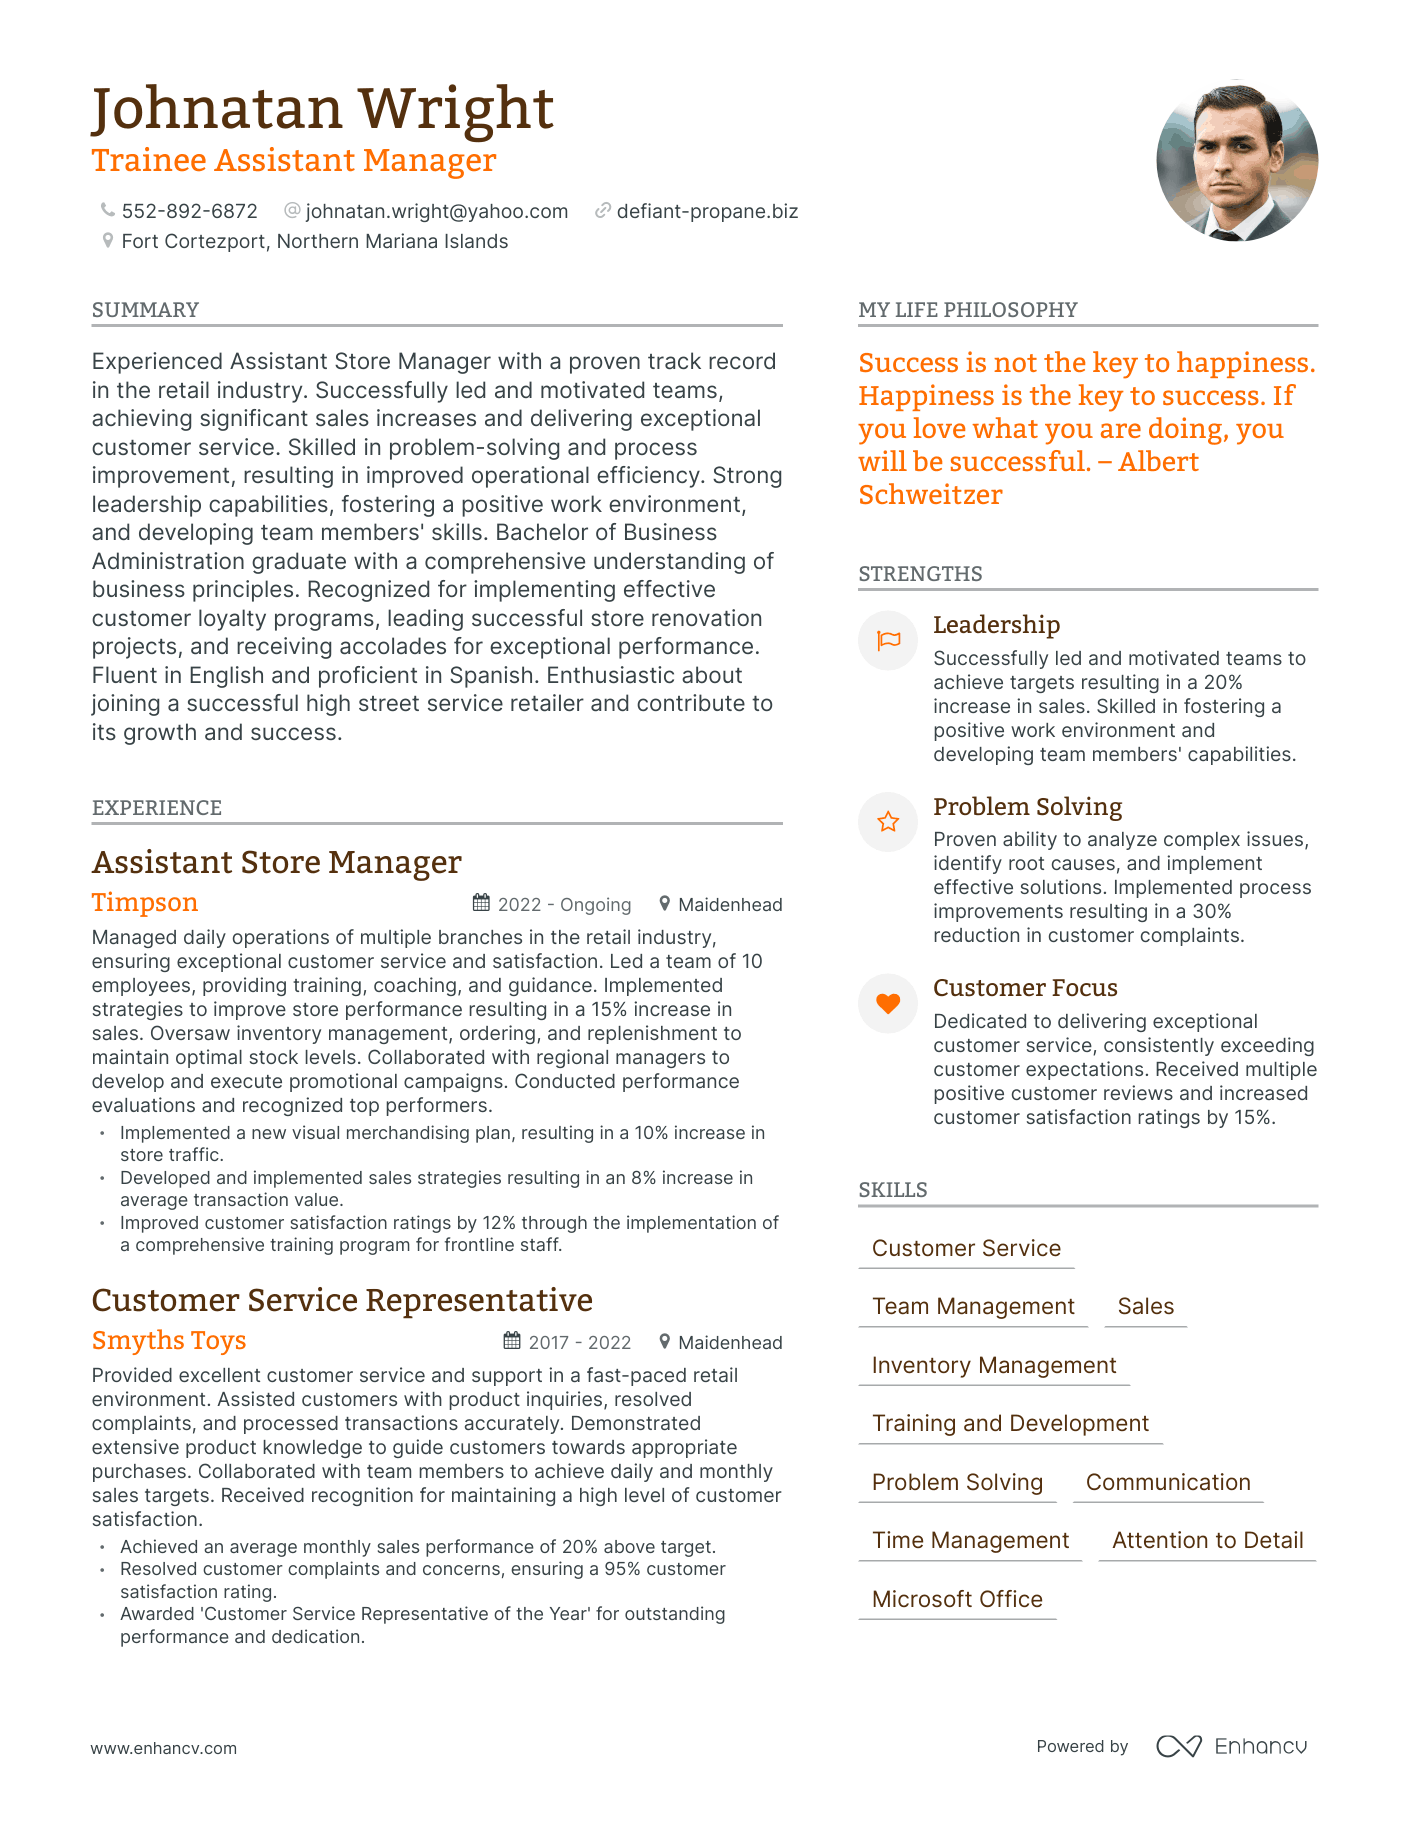 Trainee Assistant Manager resume example